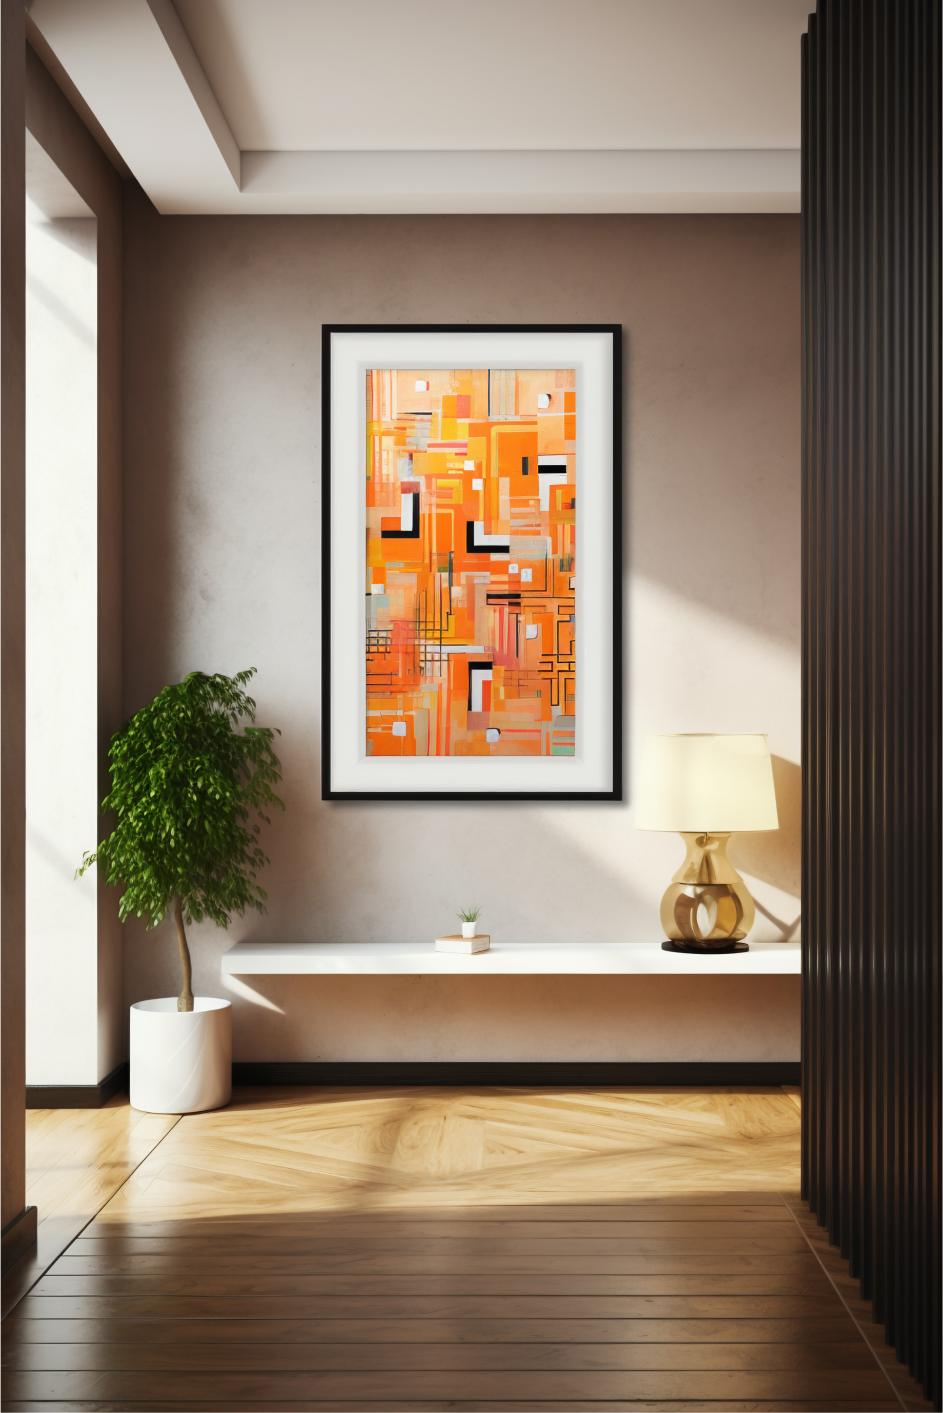 abstract framed atrwork on a white wall in a living room